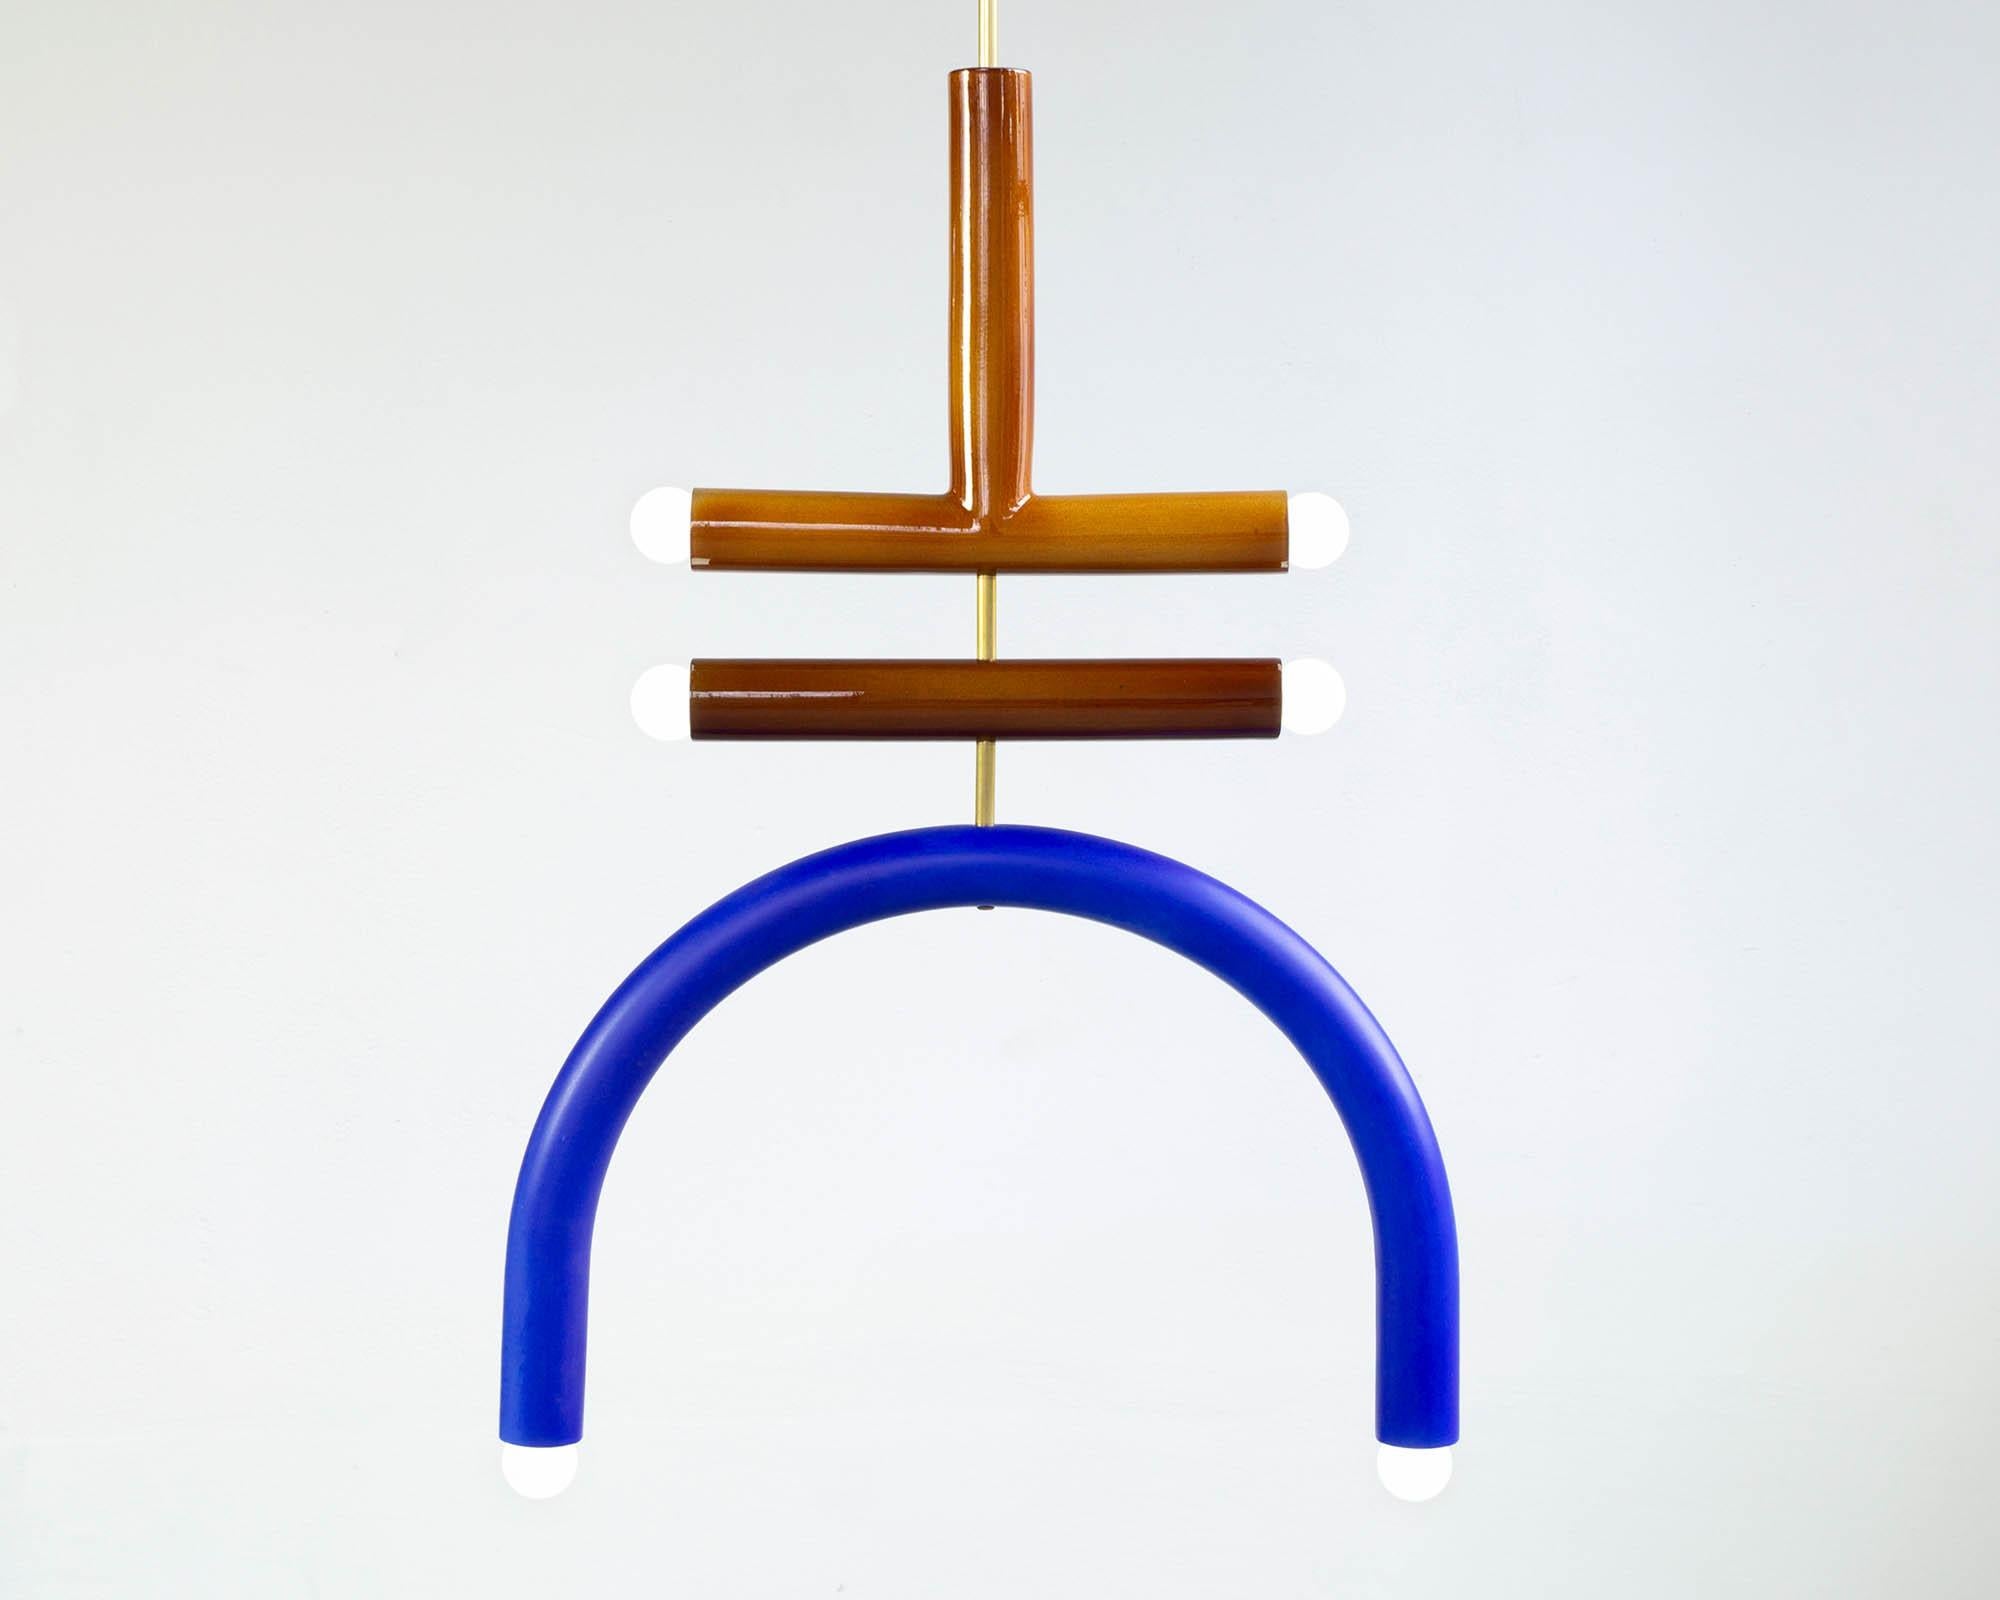 TRN F2 Pendant lamp / Ceiling lamp / Chandelier 
Designer: Pani Jurek

Dimensions: H. 82.5 x 55 x 5 cm
Model shown: Ochre, brown & cobalt blue

Bulb (not included): E27/E26, compatible with US electric system

Materials: Hand glazed ceramic and